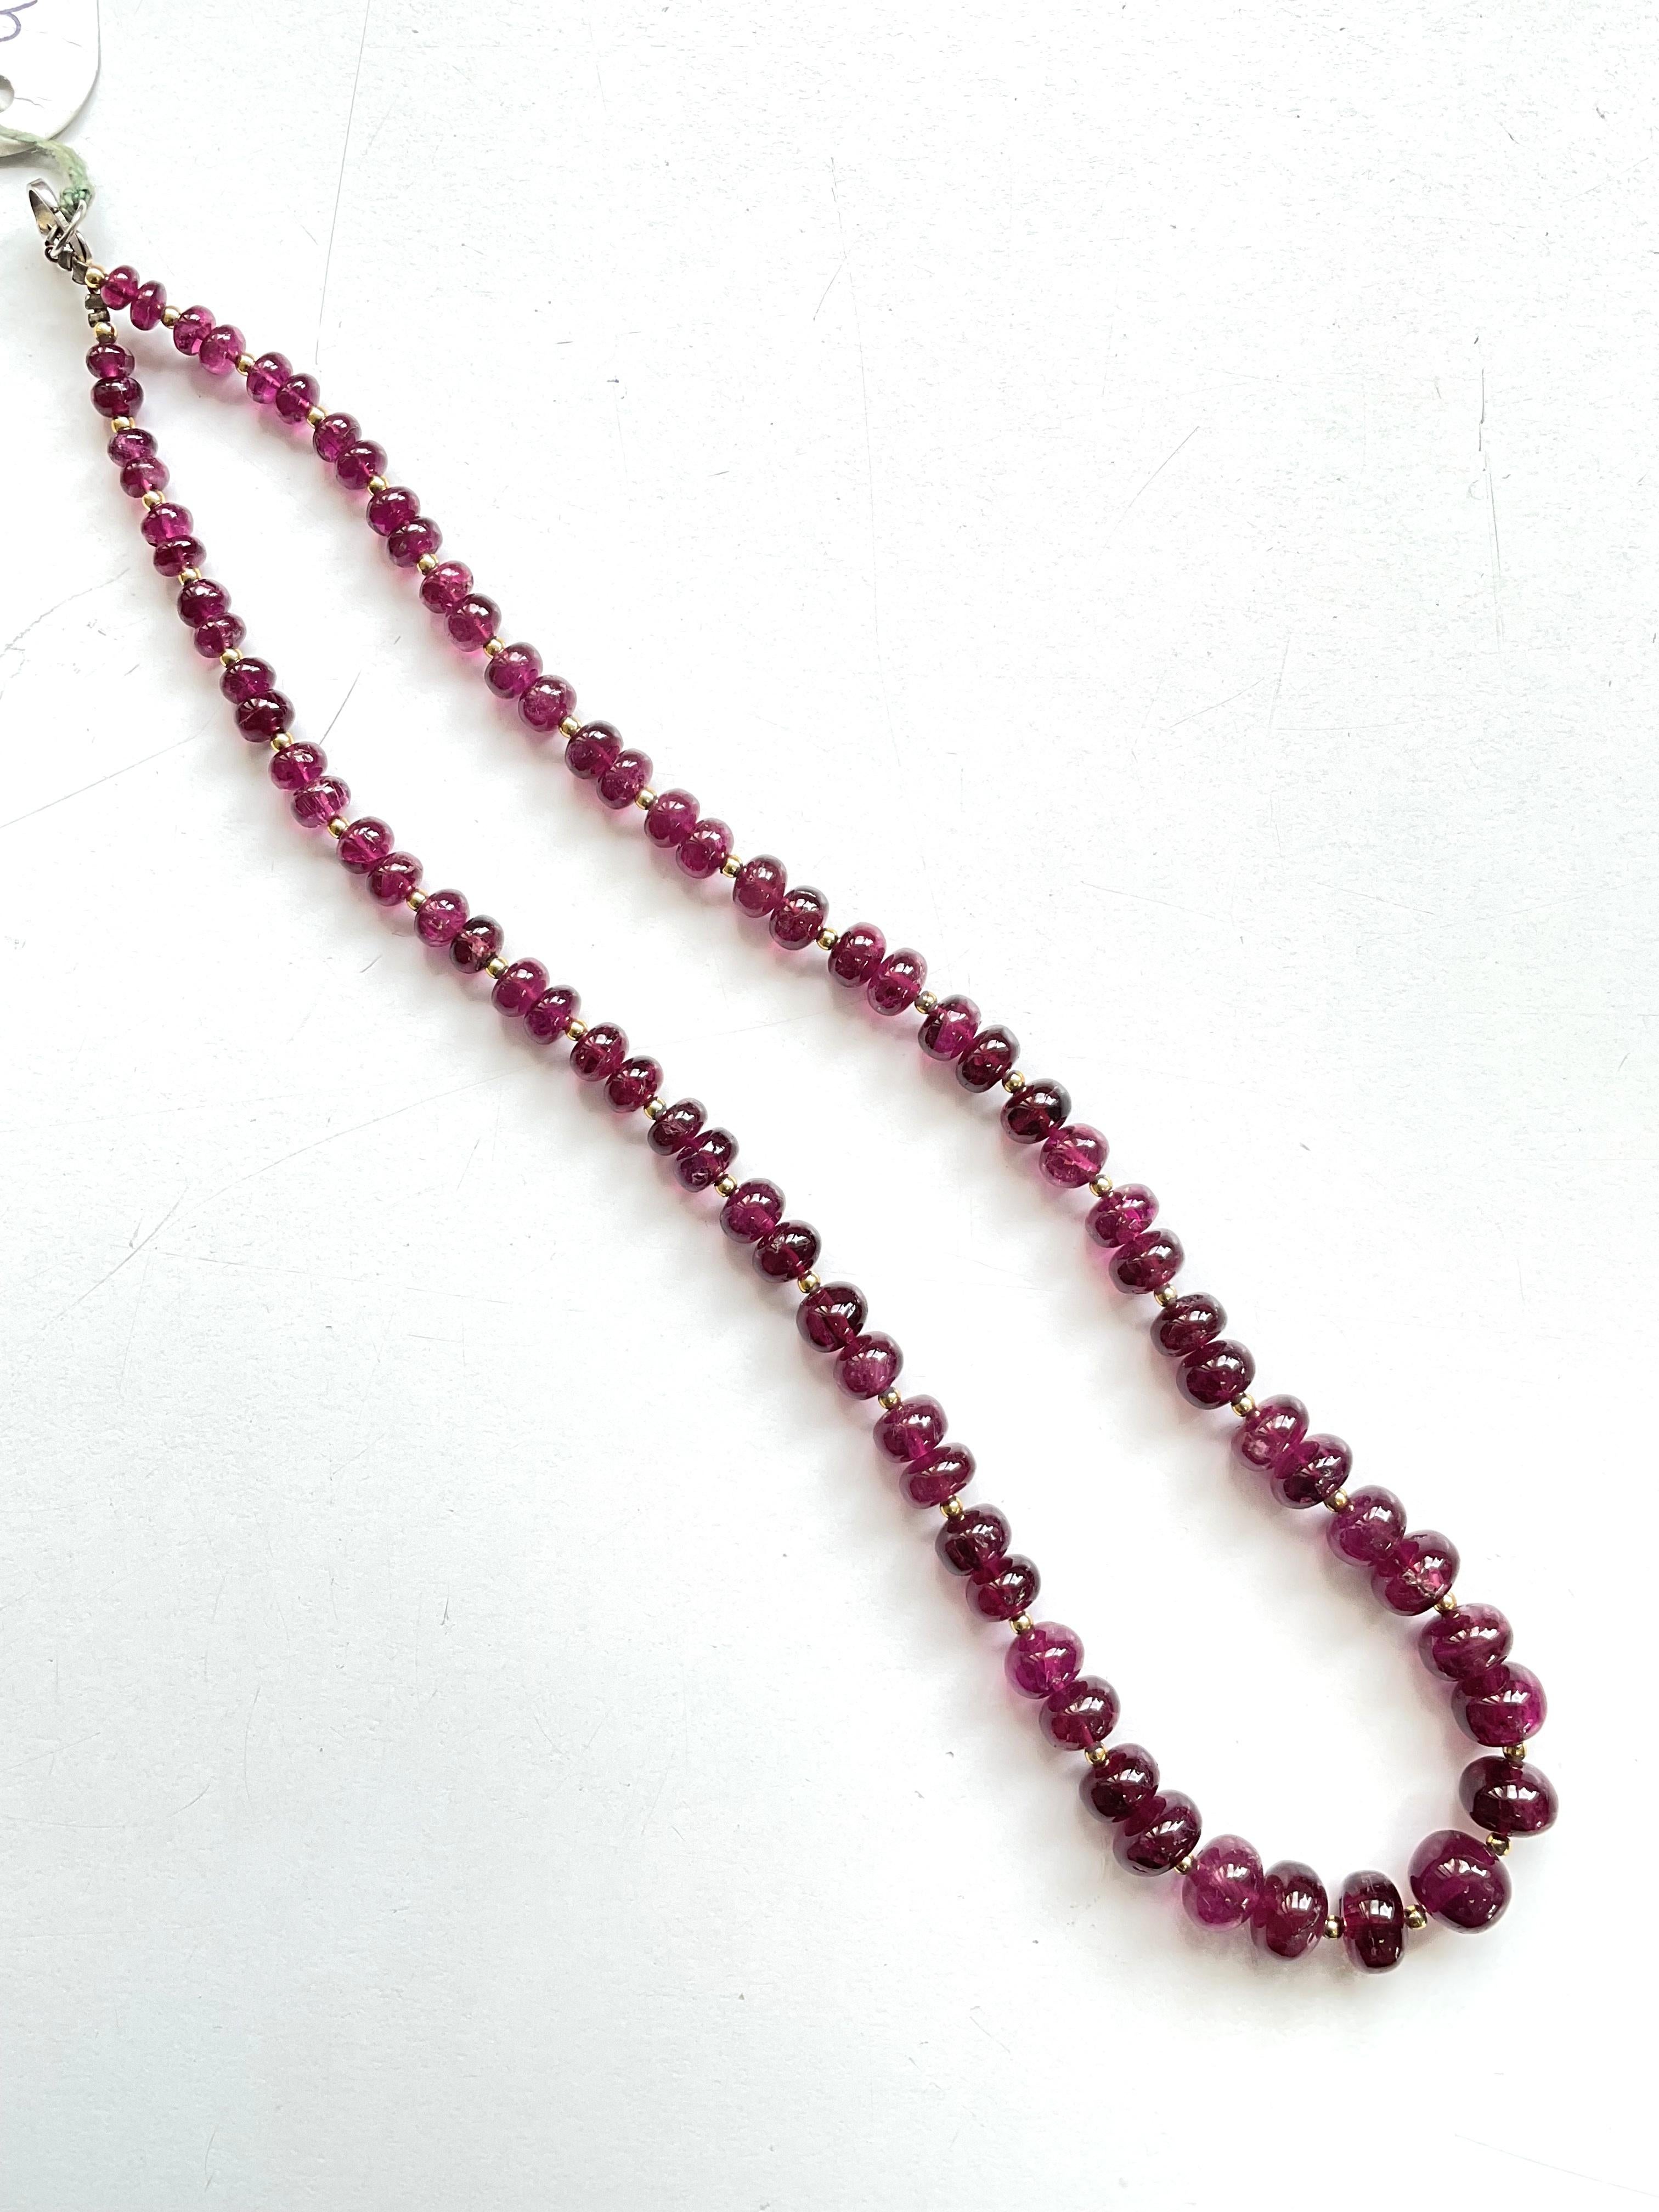 Rubellite Tourmaline Plain Beads For Top Fine Jewelry Natural Gem
Gemstone - Rubellite Tourmaline
Weight -  163.00 Carats
Strand - 1
Size - 5 To 9 MM
Shape - Beads

